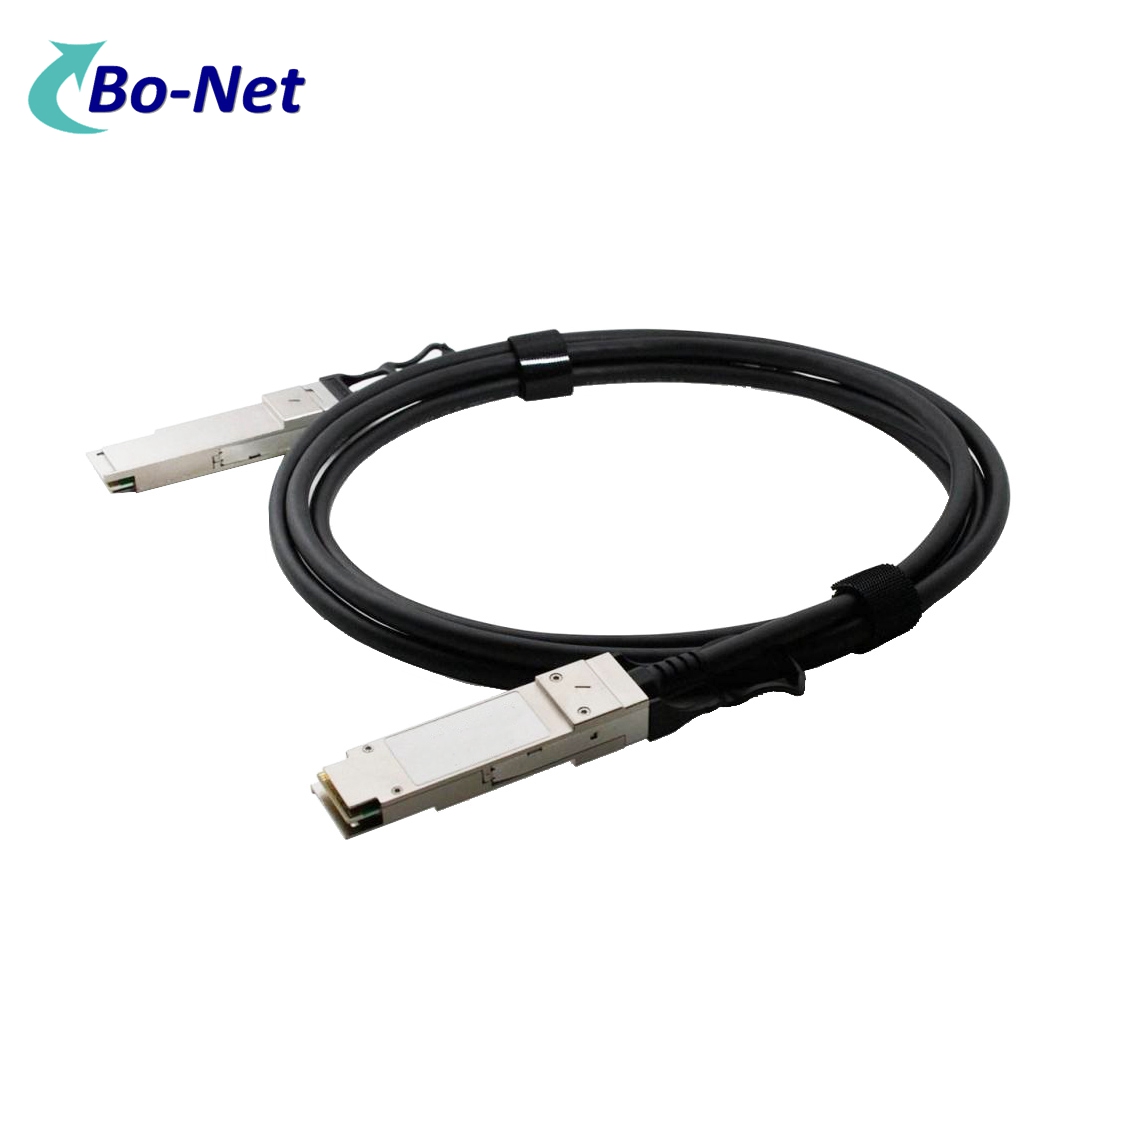 40G DAC Cable 1meters 40G QSFP+ Direct Attach Cables Compatible for Cisco Switch